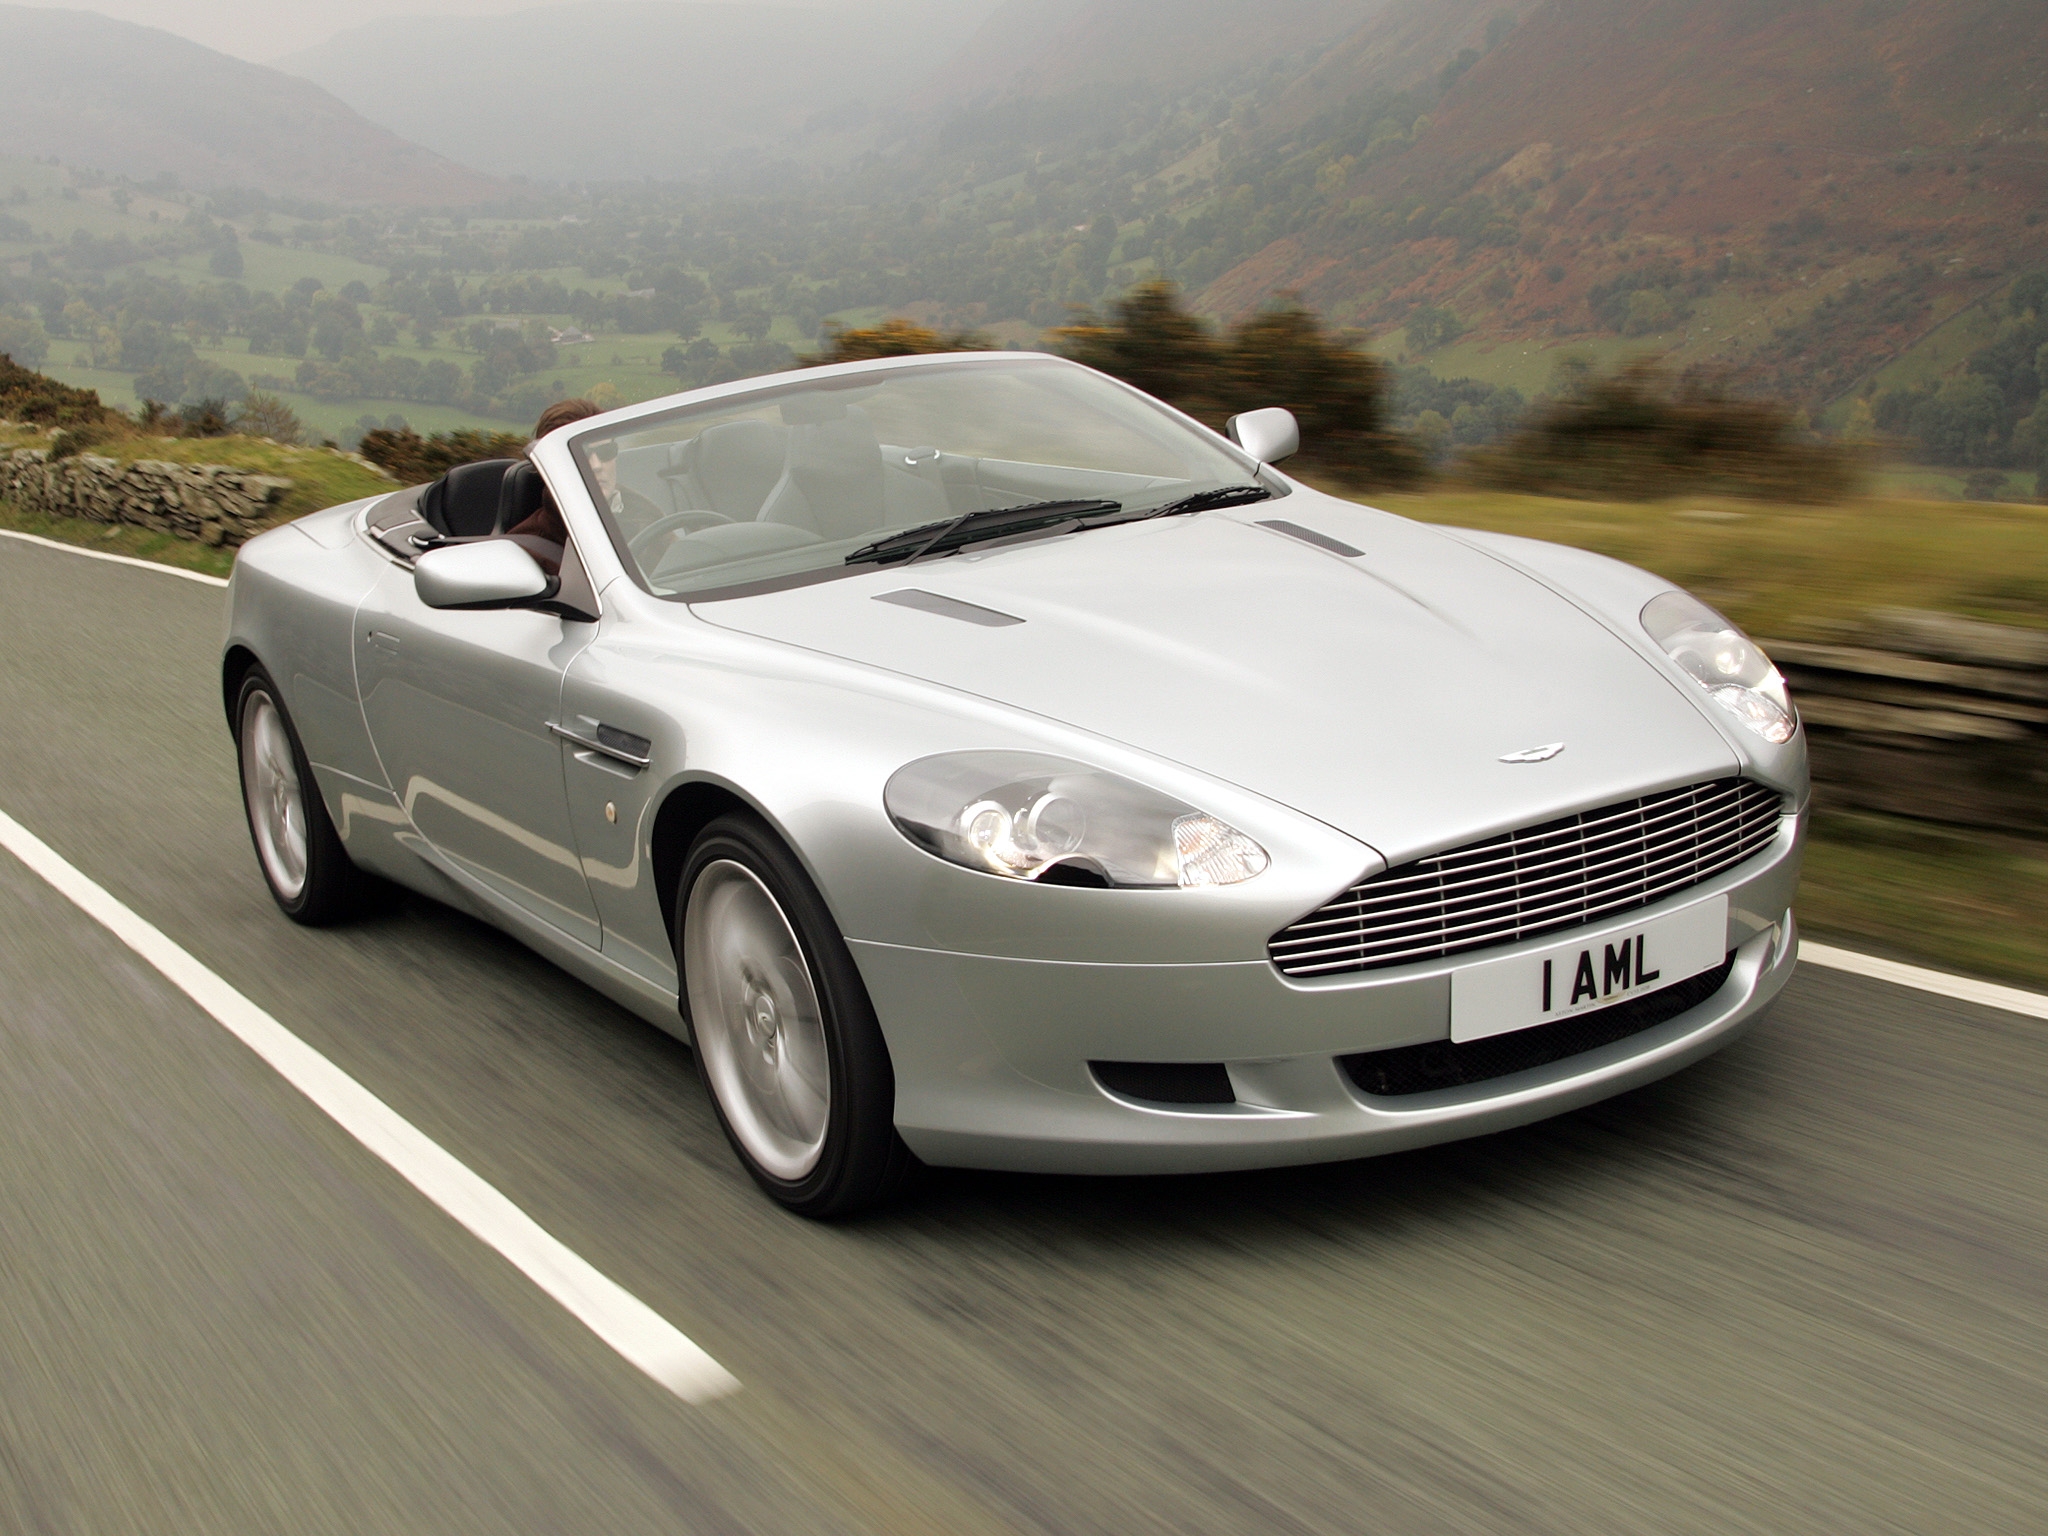 nature, aston martin, cars, front view, speed, style, 2004, silver metallic, db9